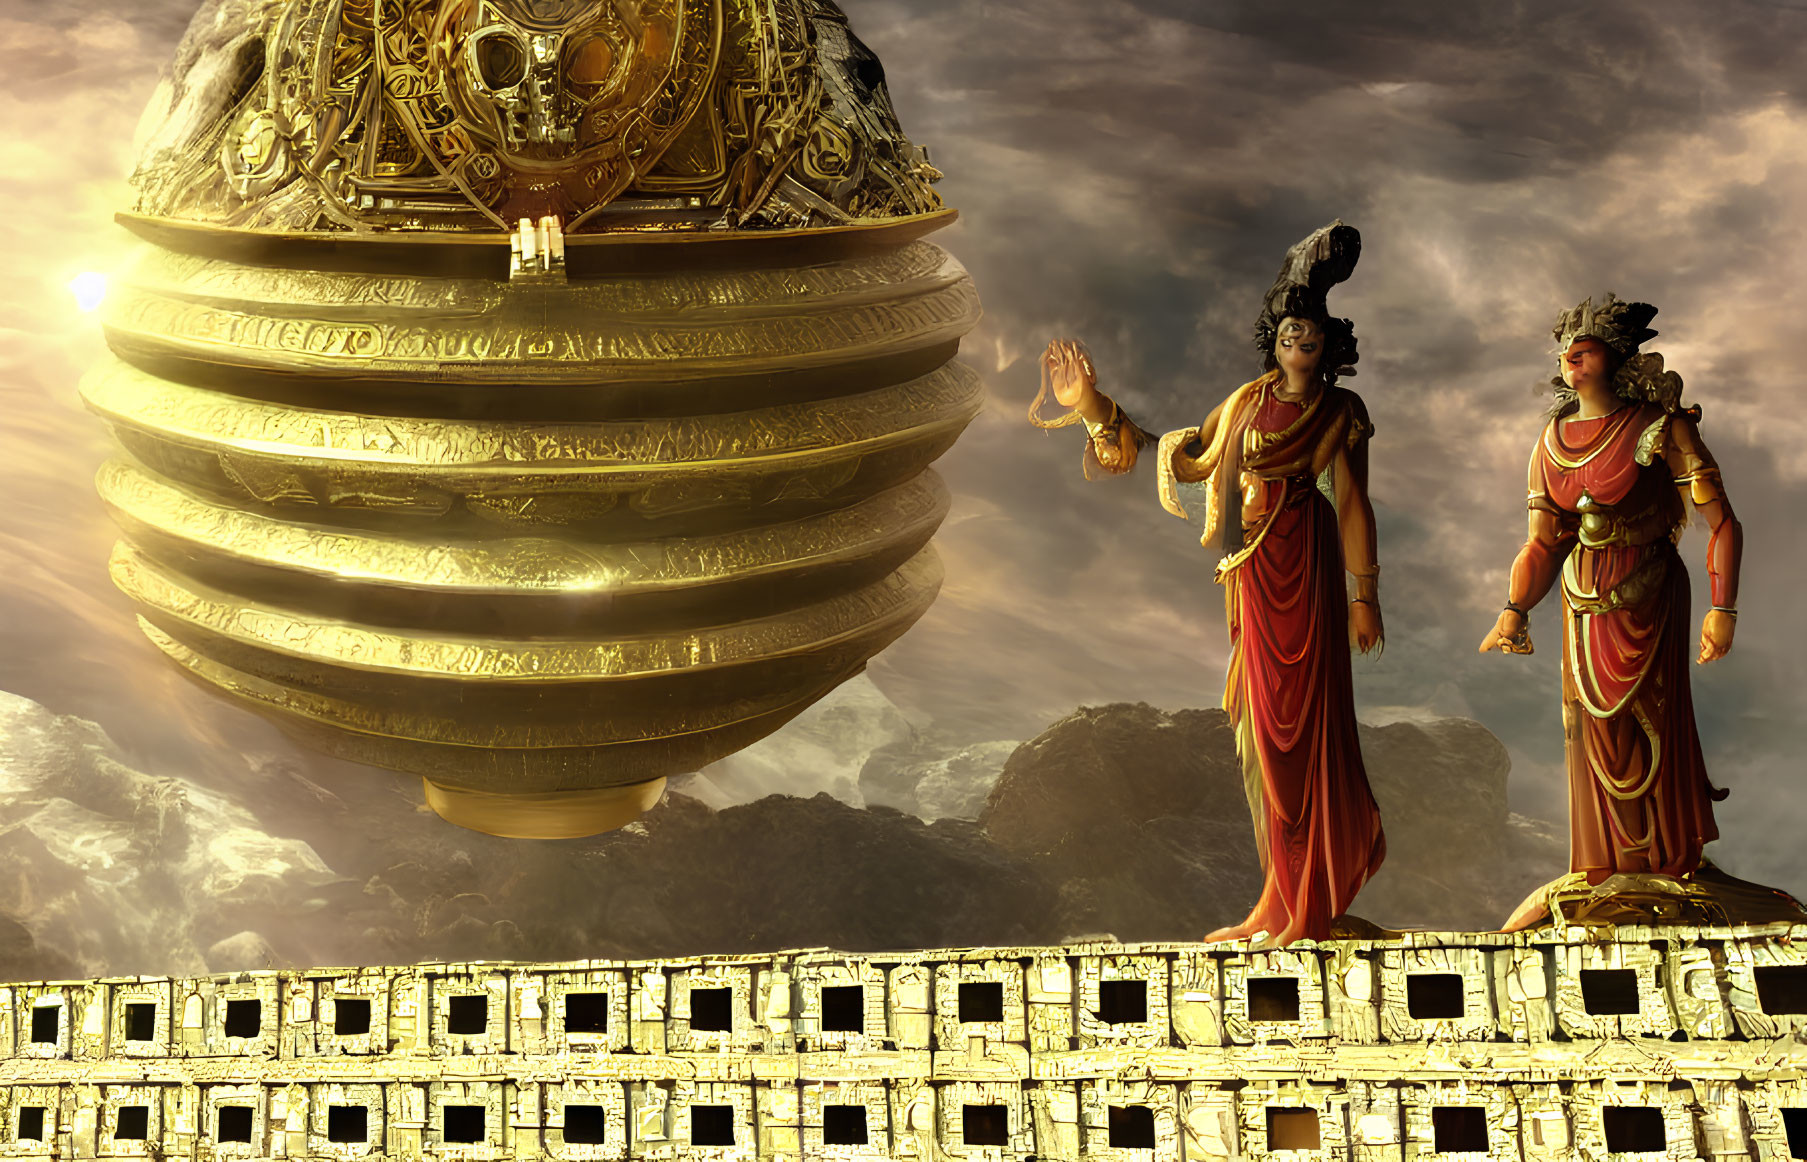 Traditional Indian attire individuals on ornate structure with floating golden sphere